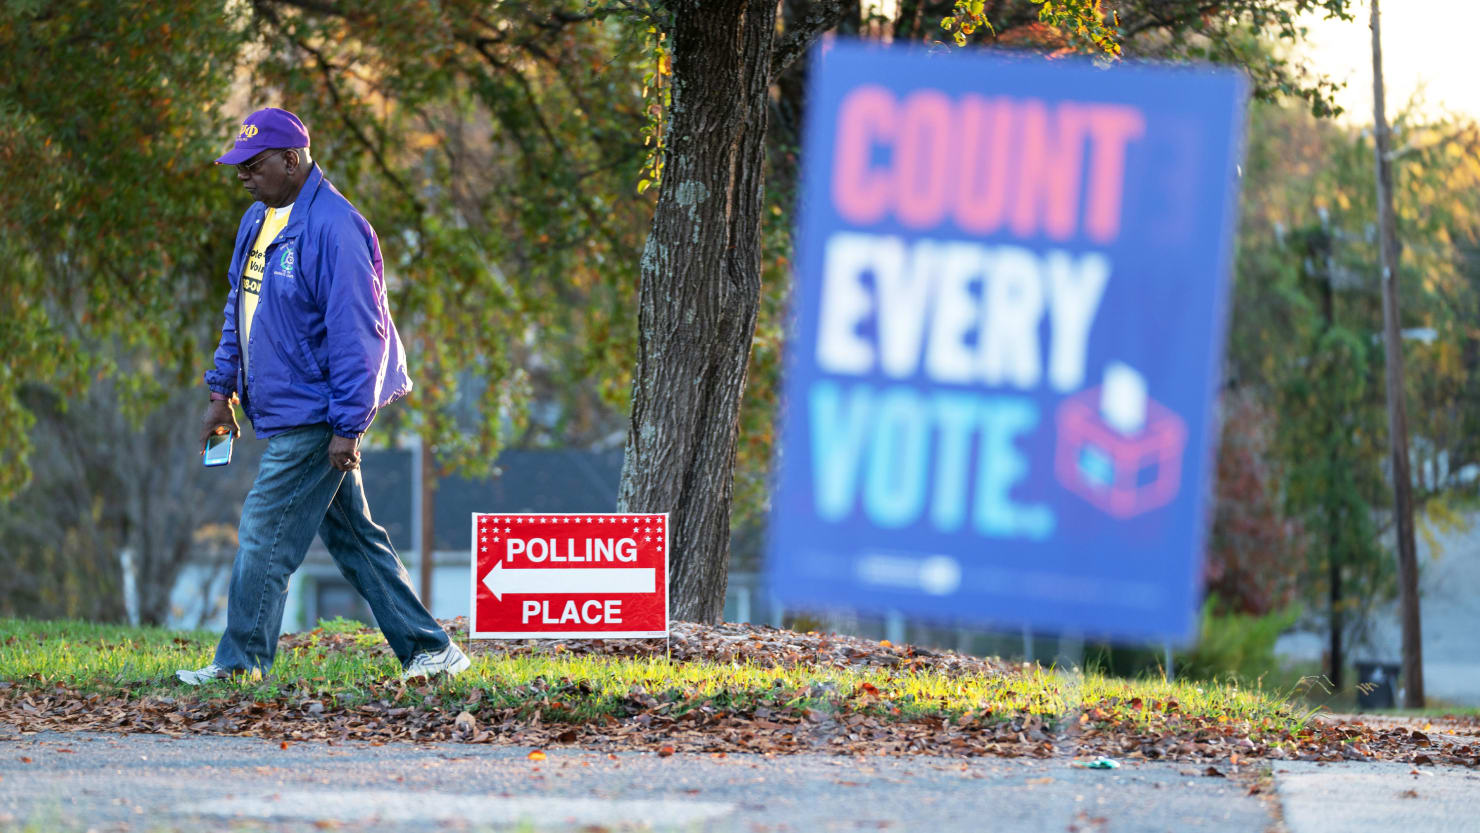 NAACP Says Racist Redistricting Aims to Silence Black Voters